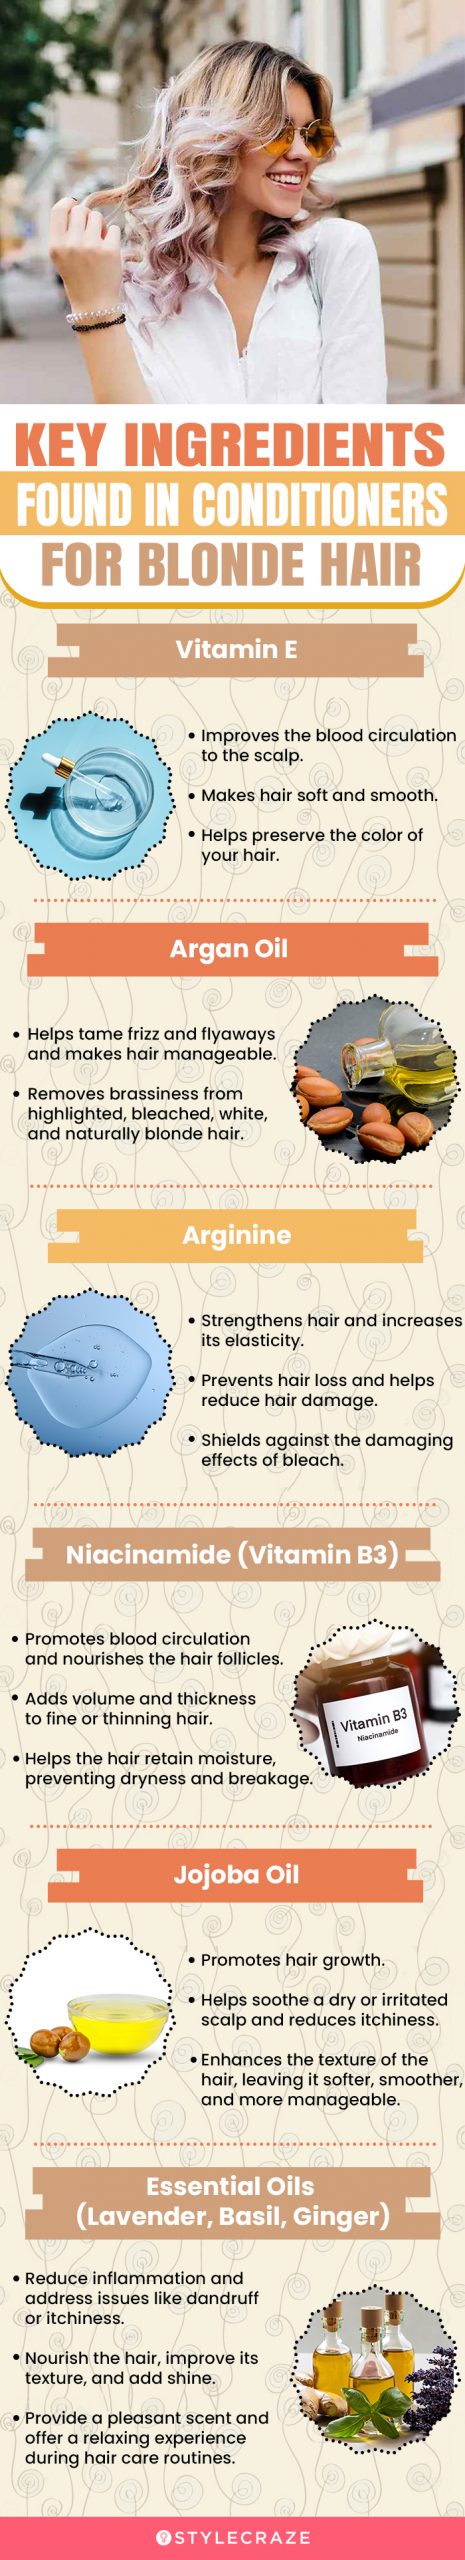 Key Ingredients Found In Conditioners For Blonde Hair (infographic)